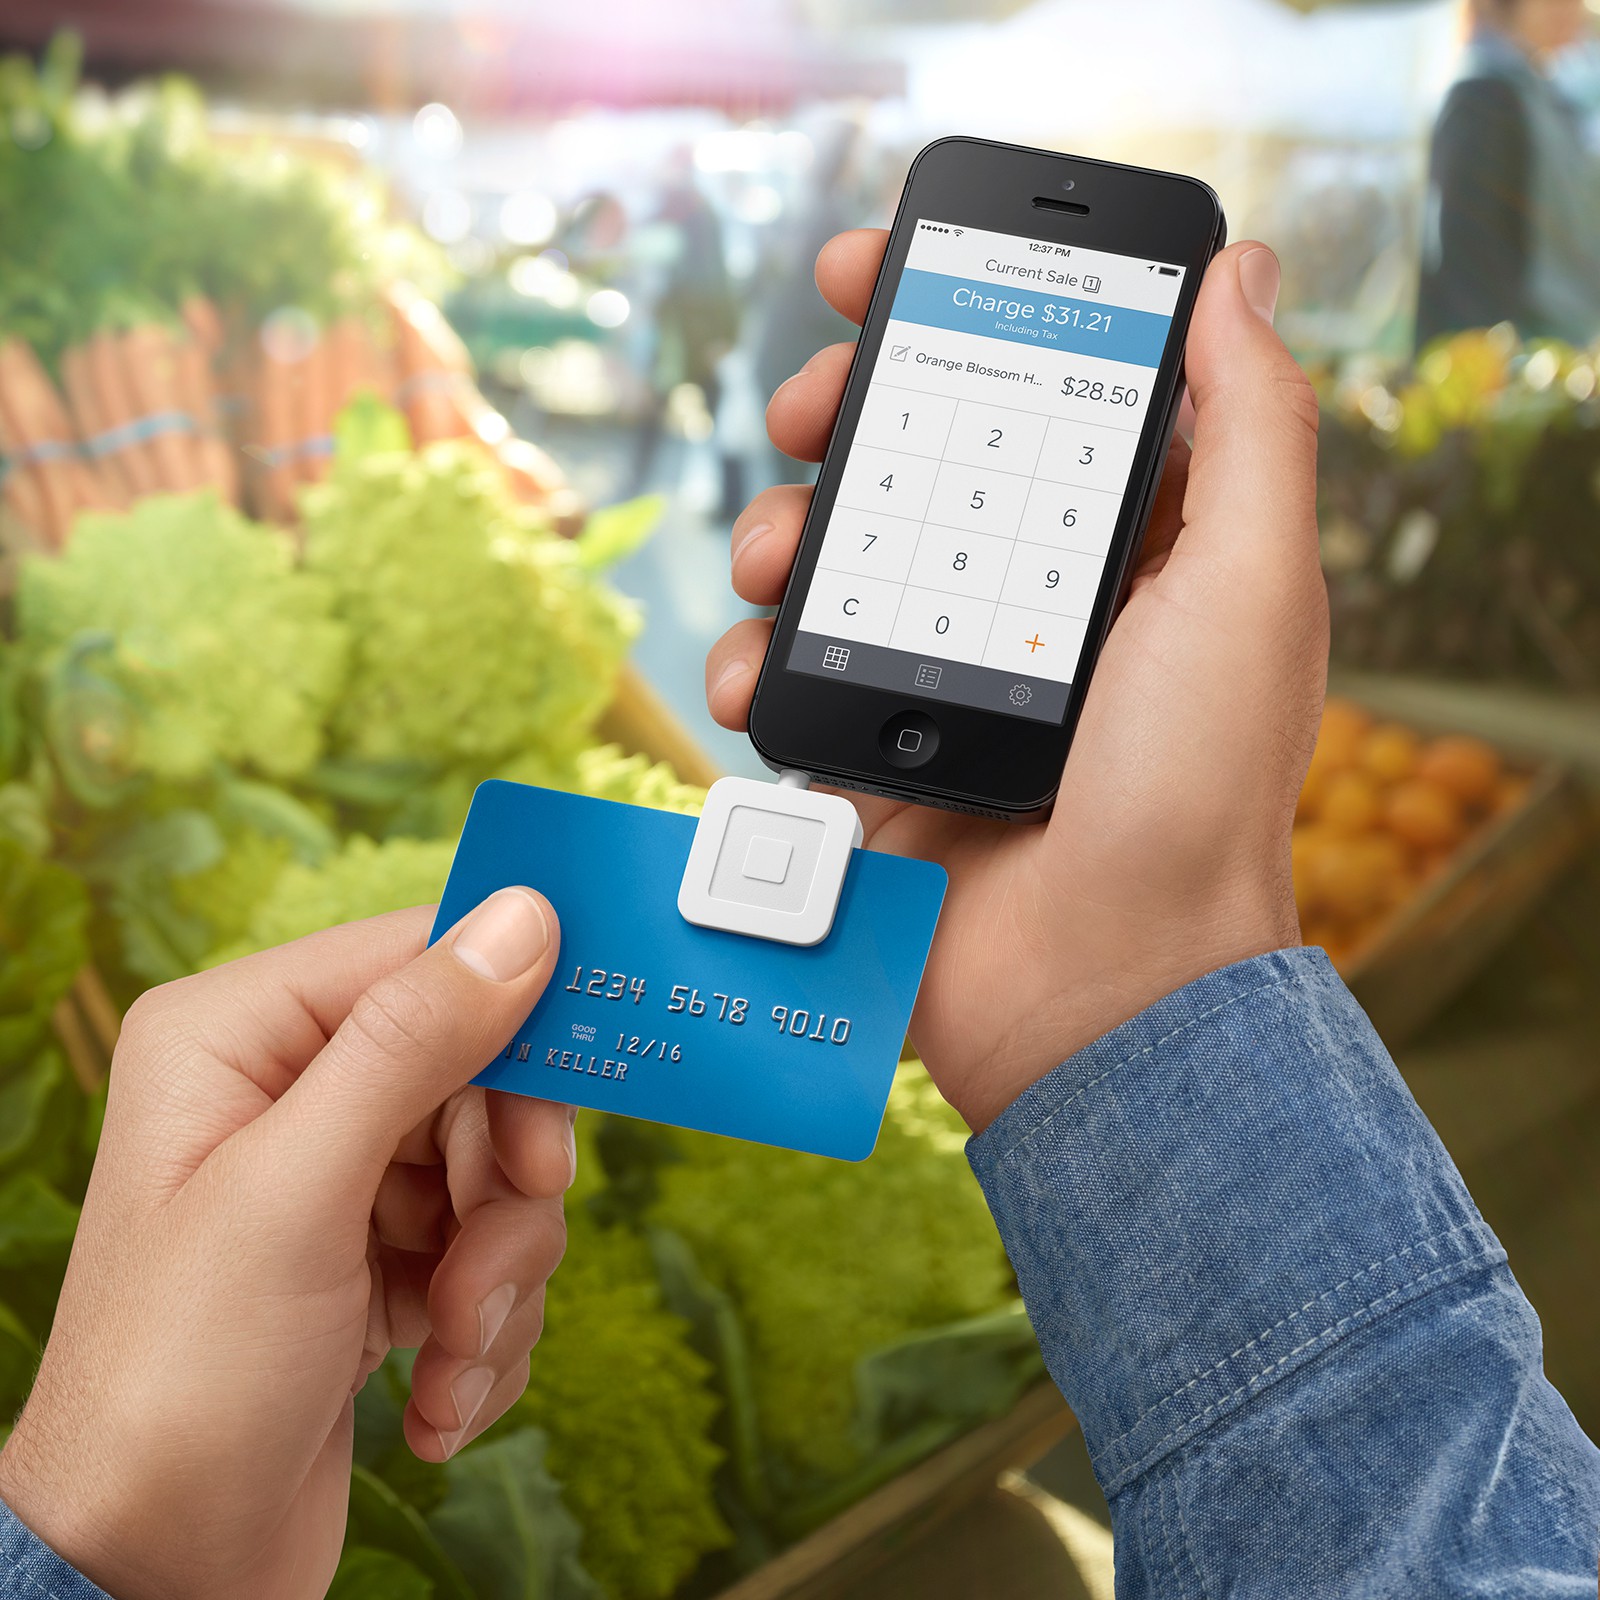 Payments Startup Square Hits $6bn Valuation